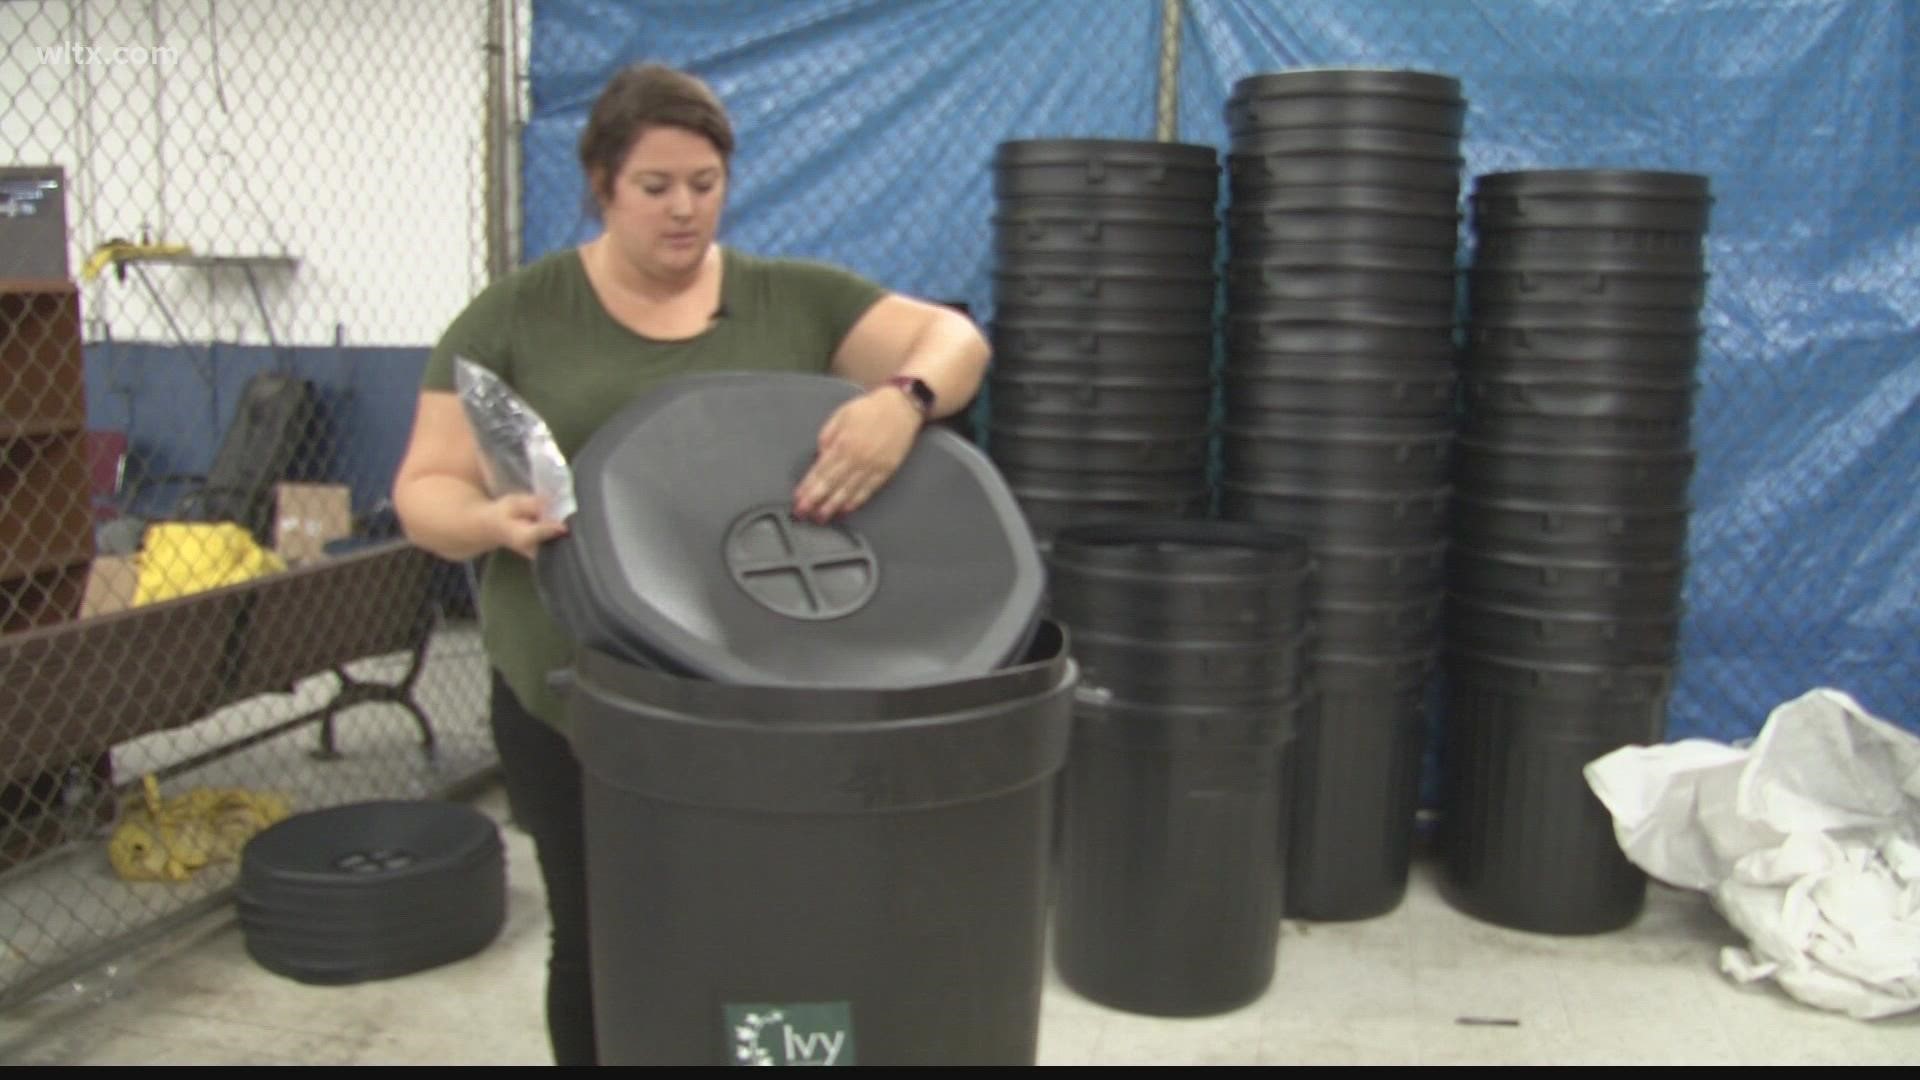 Residents of Columbia and Richland County can buy their own composter and rain water collector through a program that offers them at a discount.